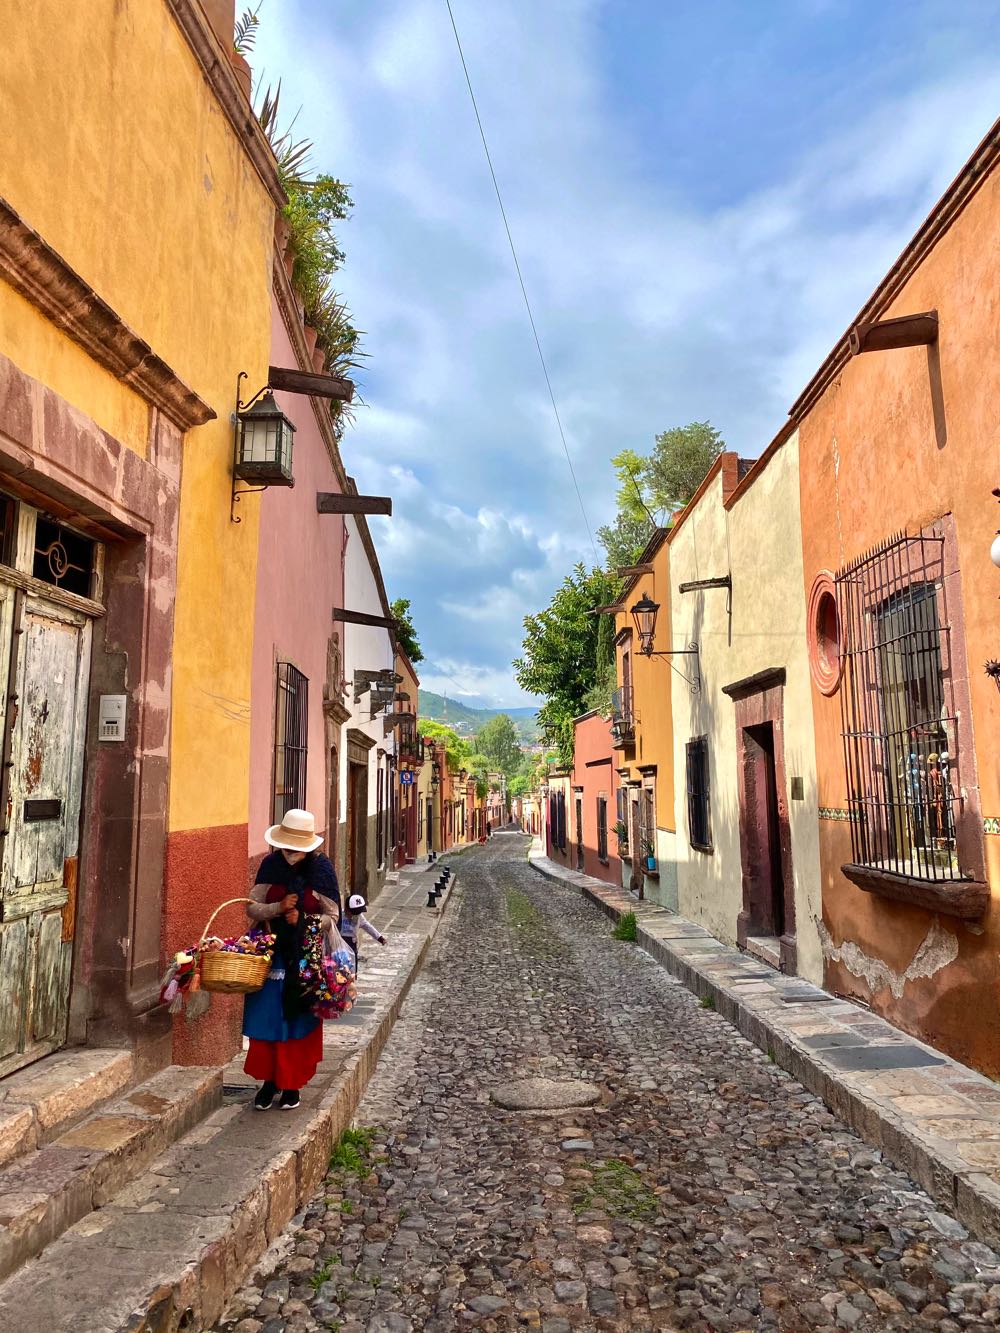 joining a walking tour is one of the best things to do in san miguel de allende